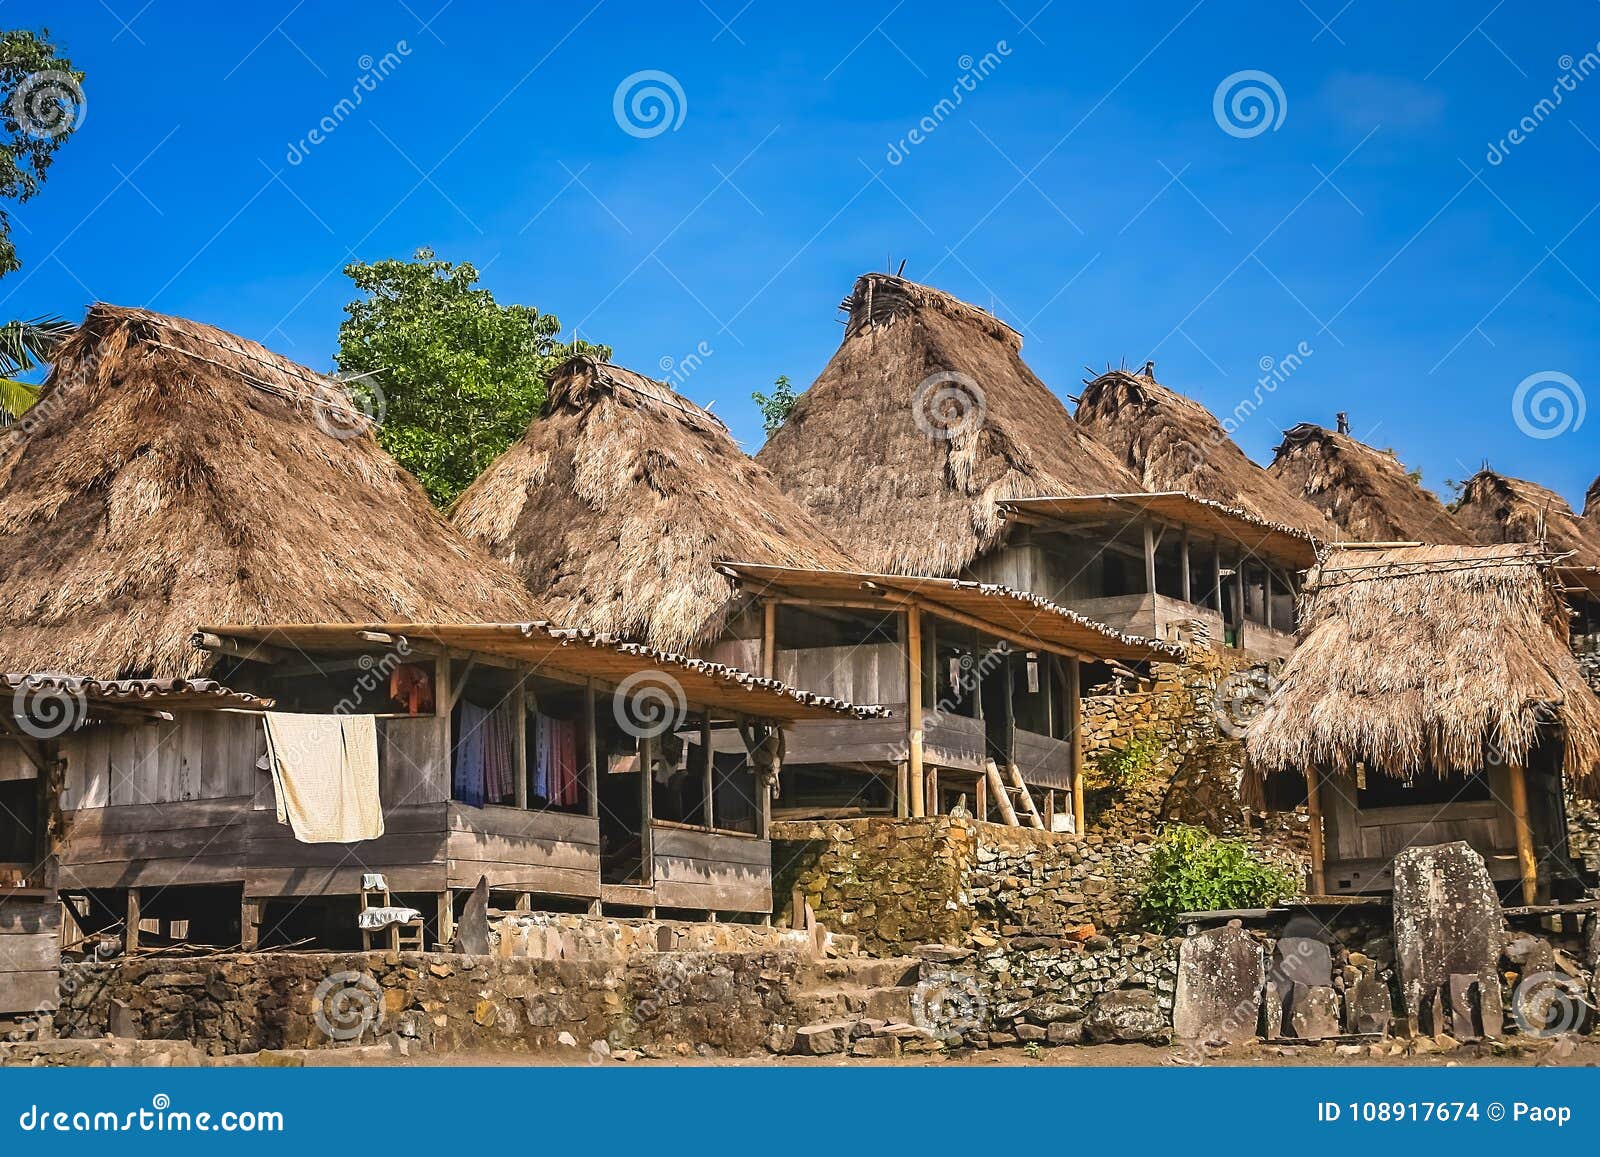 old wooden huts in bena village